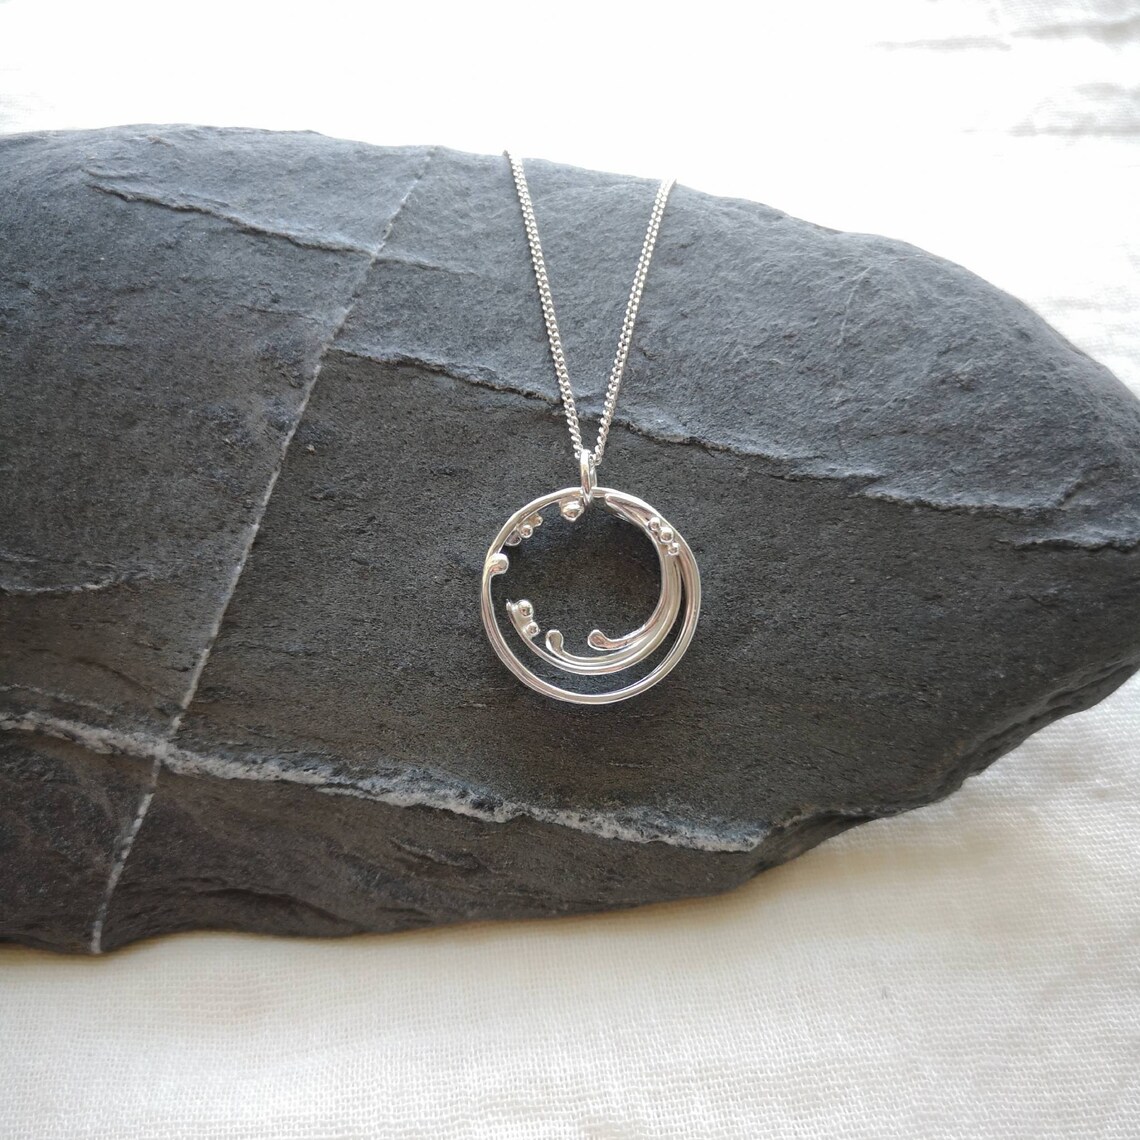 Wild Wave Necklace Large Ocean Wave Necklace Sustainable Recycled ...